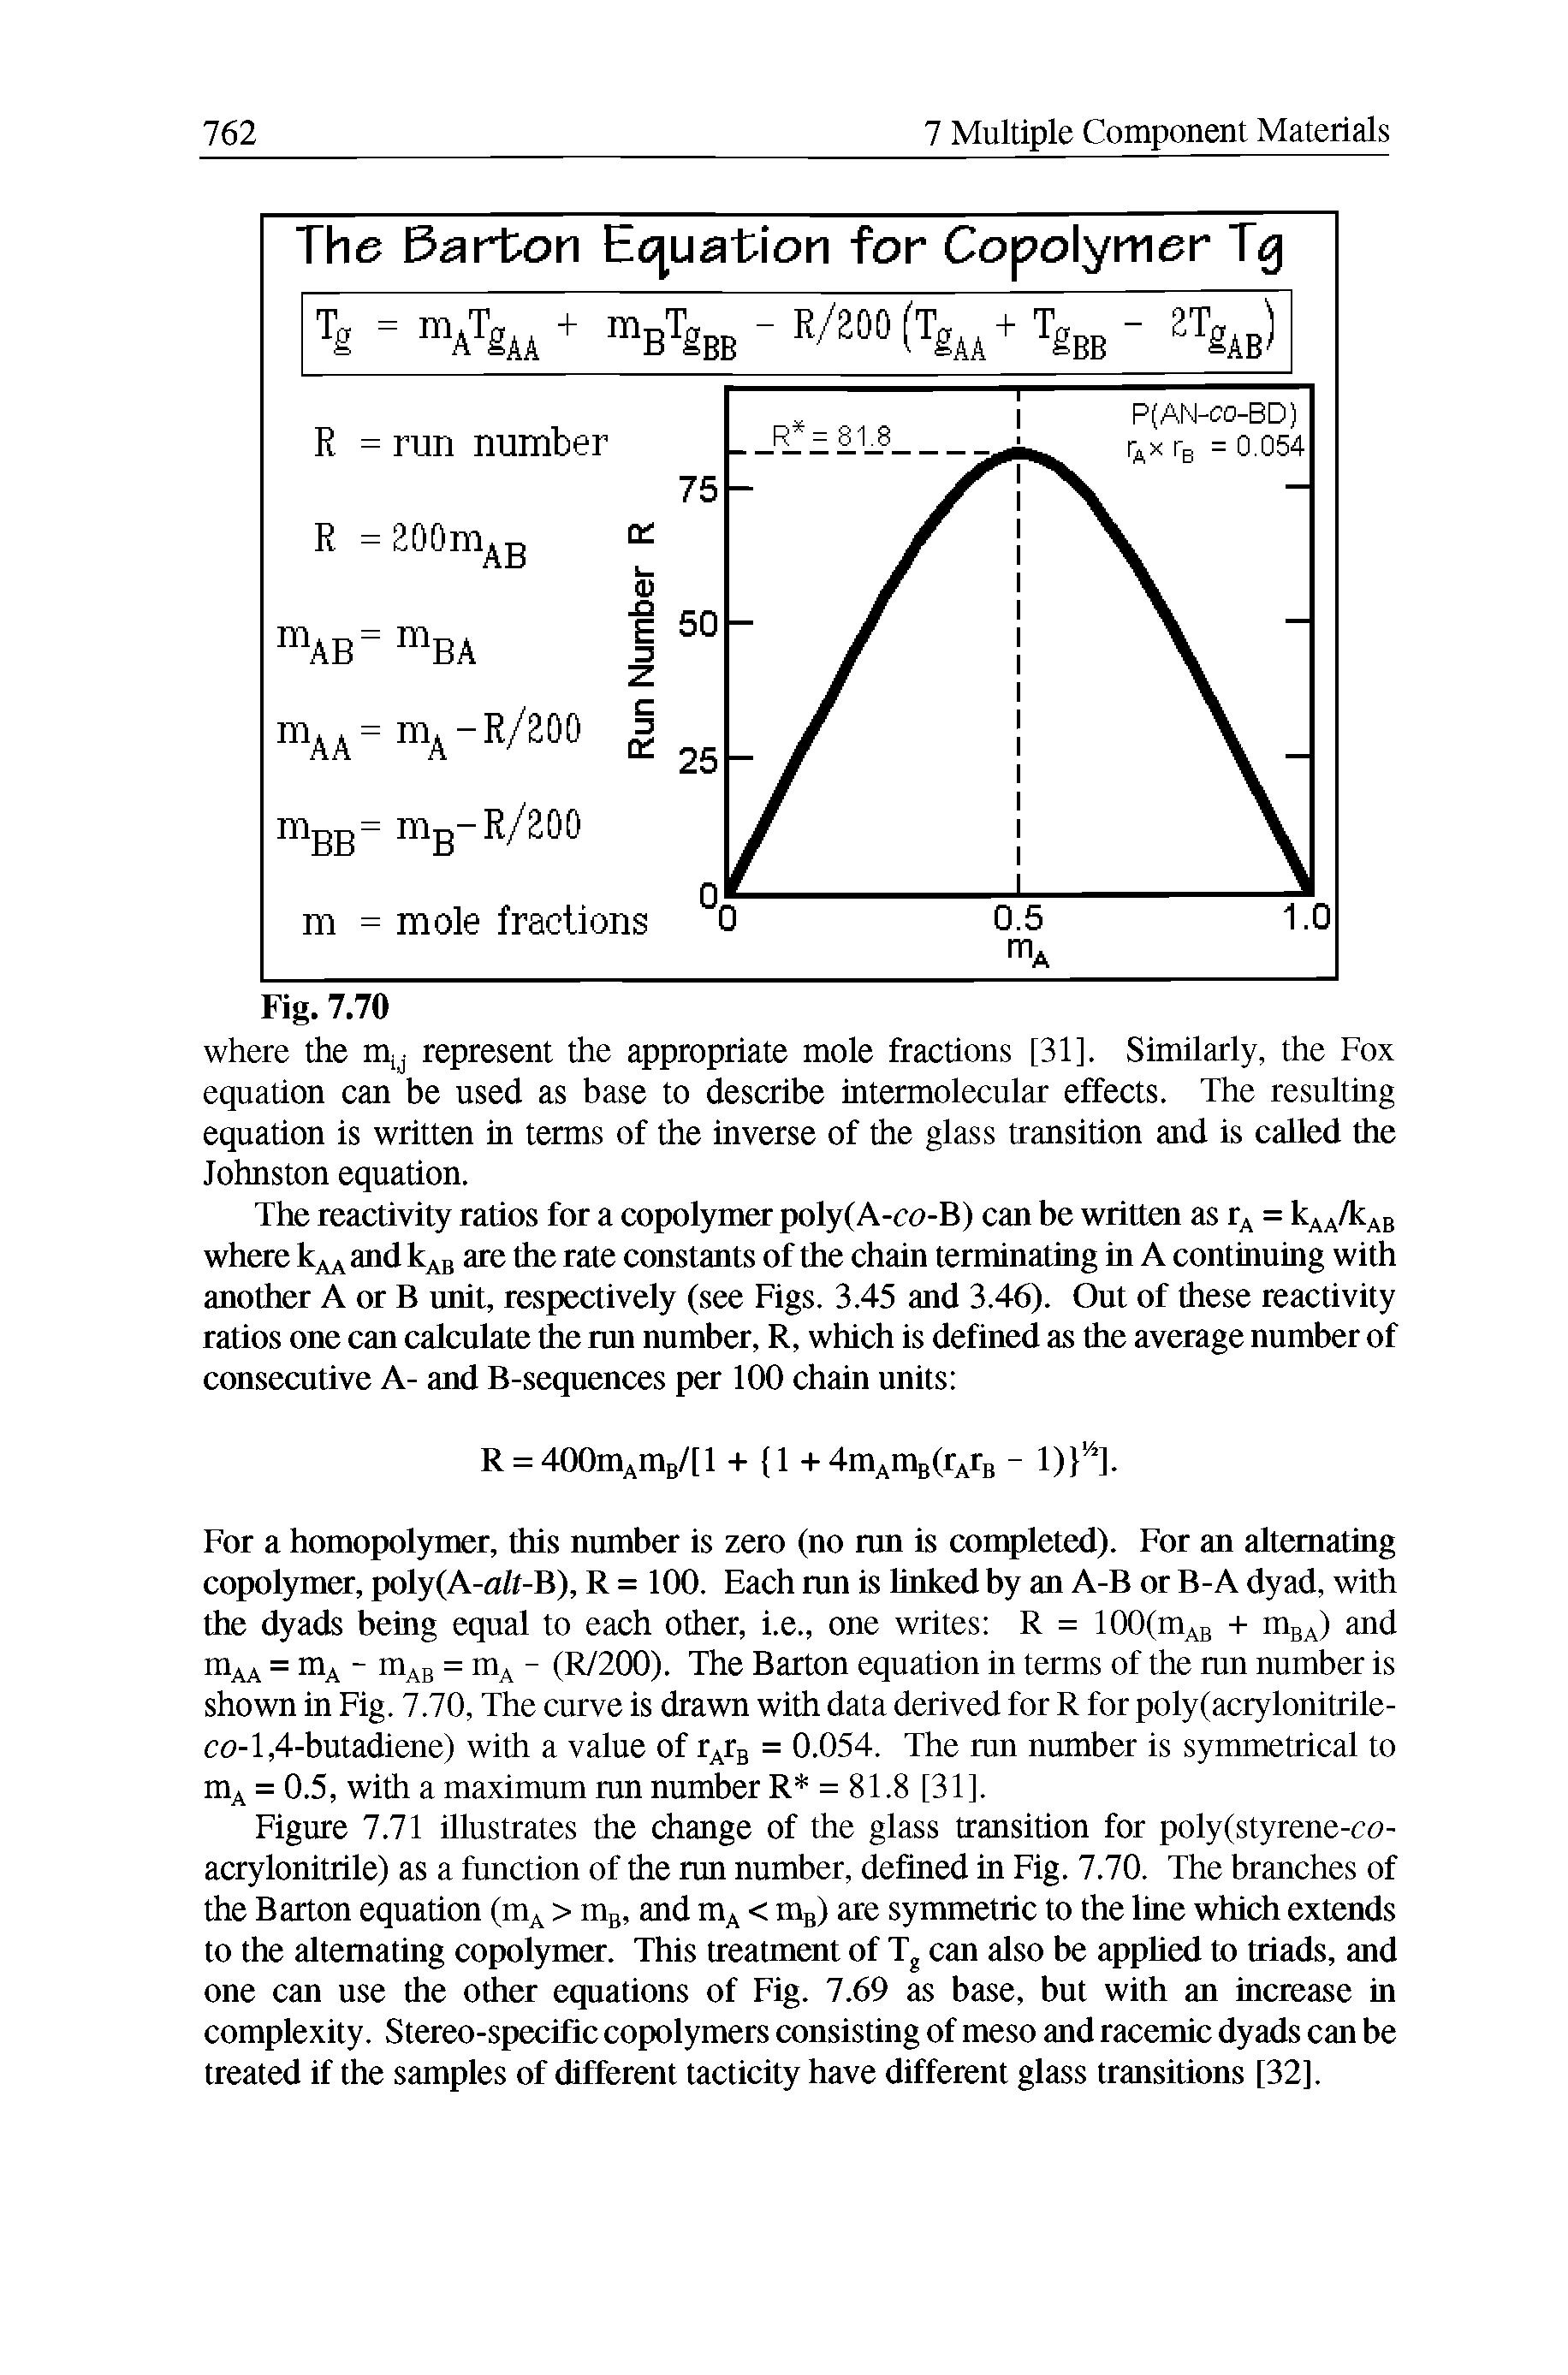 Figure 7.71 illustrates the change of the glass transition for poly(styrene-co-acrylonitrile) as a function of the run number, defined in Fig. 7.70. The branches of the Barton equation (mA > mg, and mA < mB) are symmetric to the line which extends to the alternating copolymer. This treatment of T can also be applied to triads, and one can use the other equations of Fig. 7.69 as base, but with an increase in complexity. Stereo-specific copolymers consisting of meso and racemic dyads can be treated if the samples of different tacticity have different glass transitions [32].